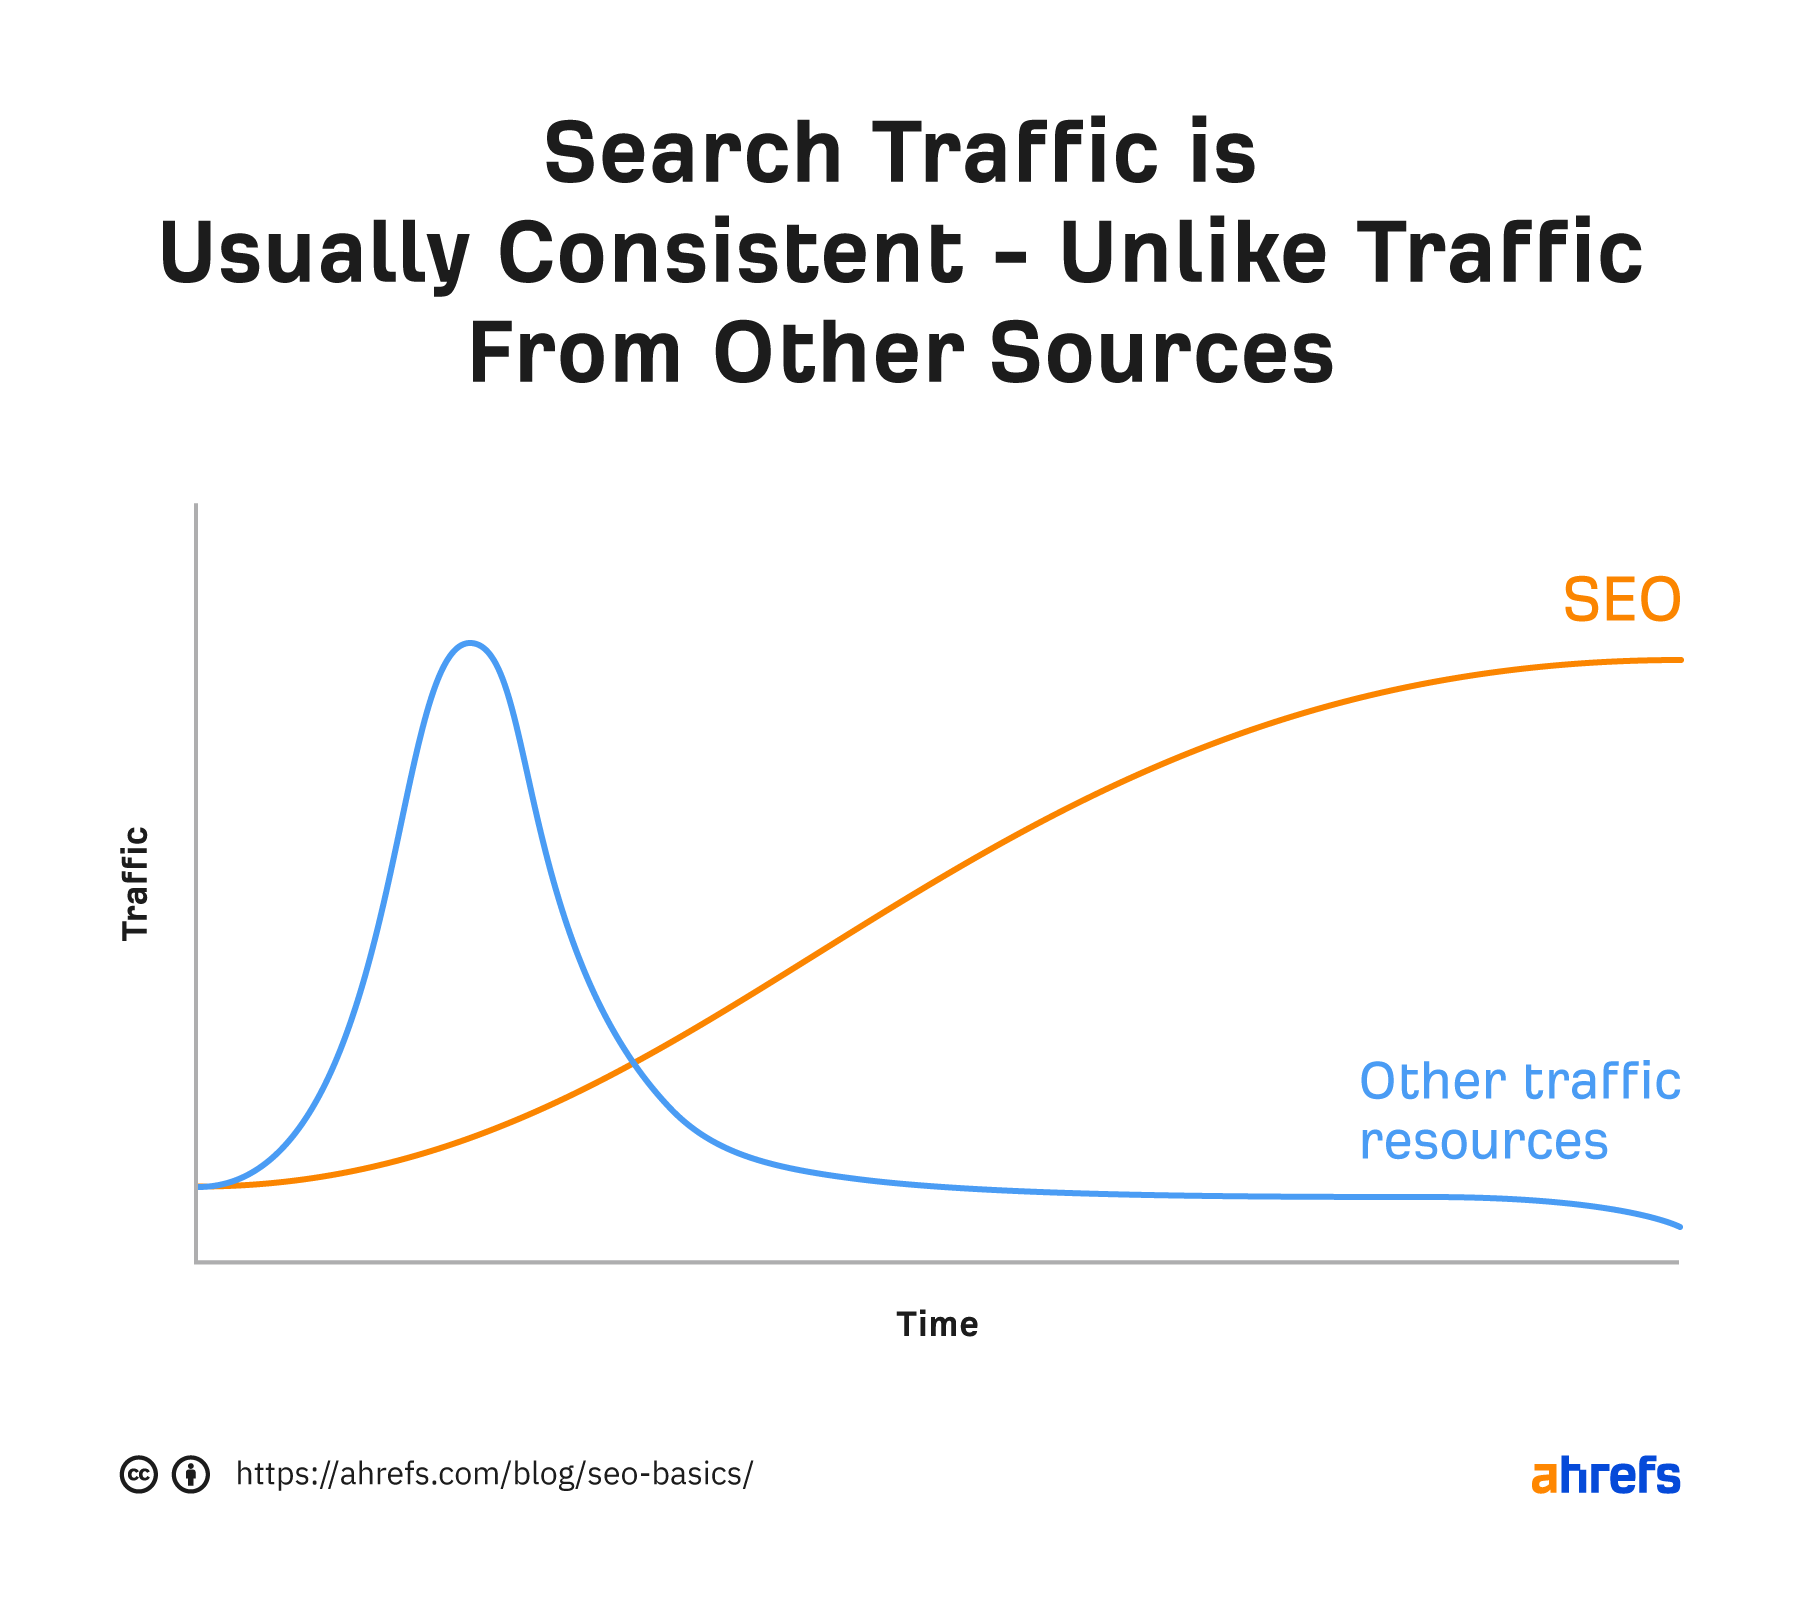 How traffic from search compares to traffic from other traffic sources